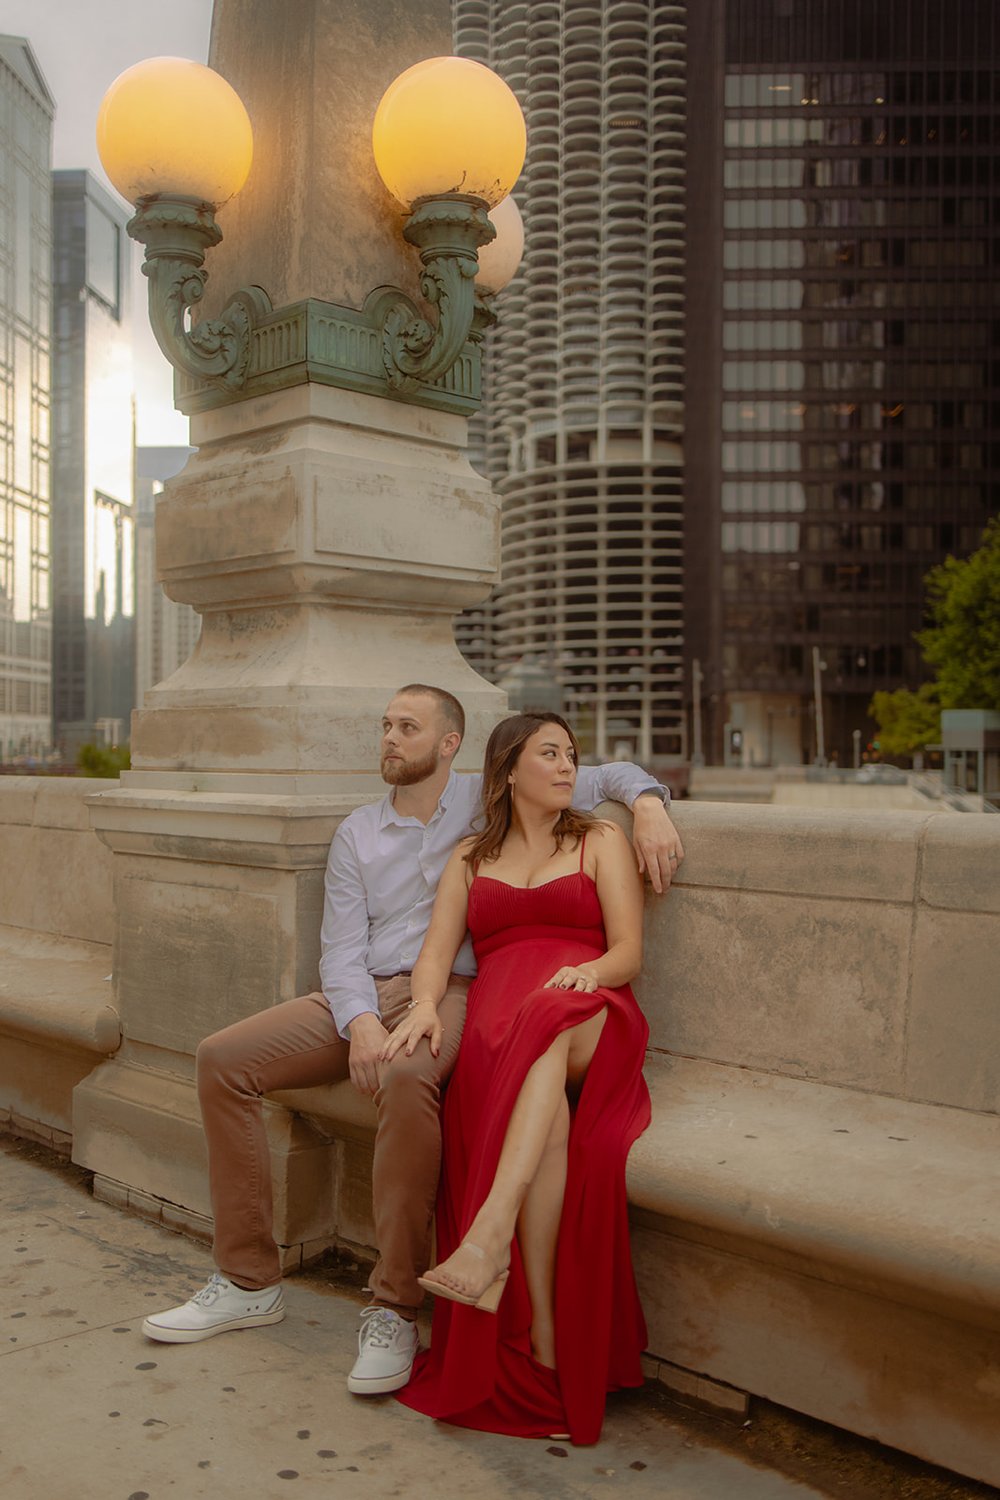 DT1A0075 MICHAEL-AND-STEPHANIE-CHICAGO-ILLINOIS-COUPLES-THE-GERNANDS.jpg